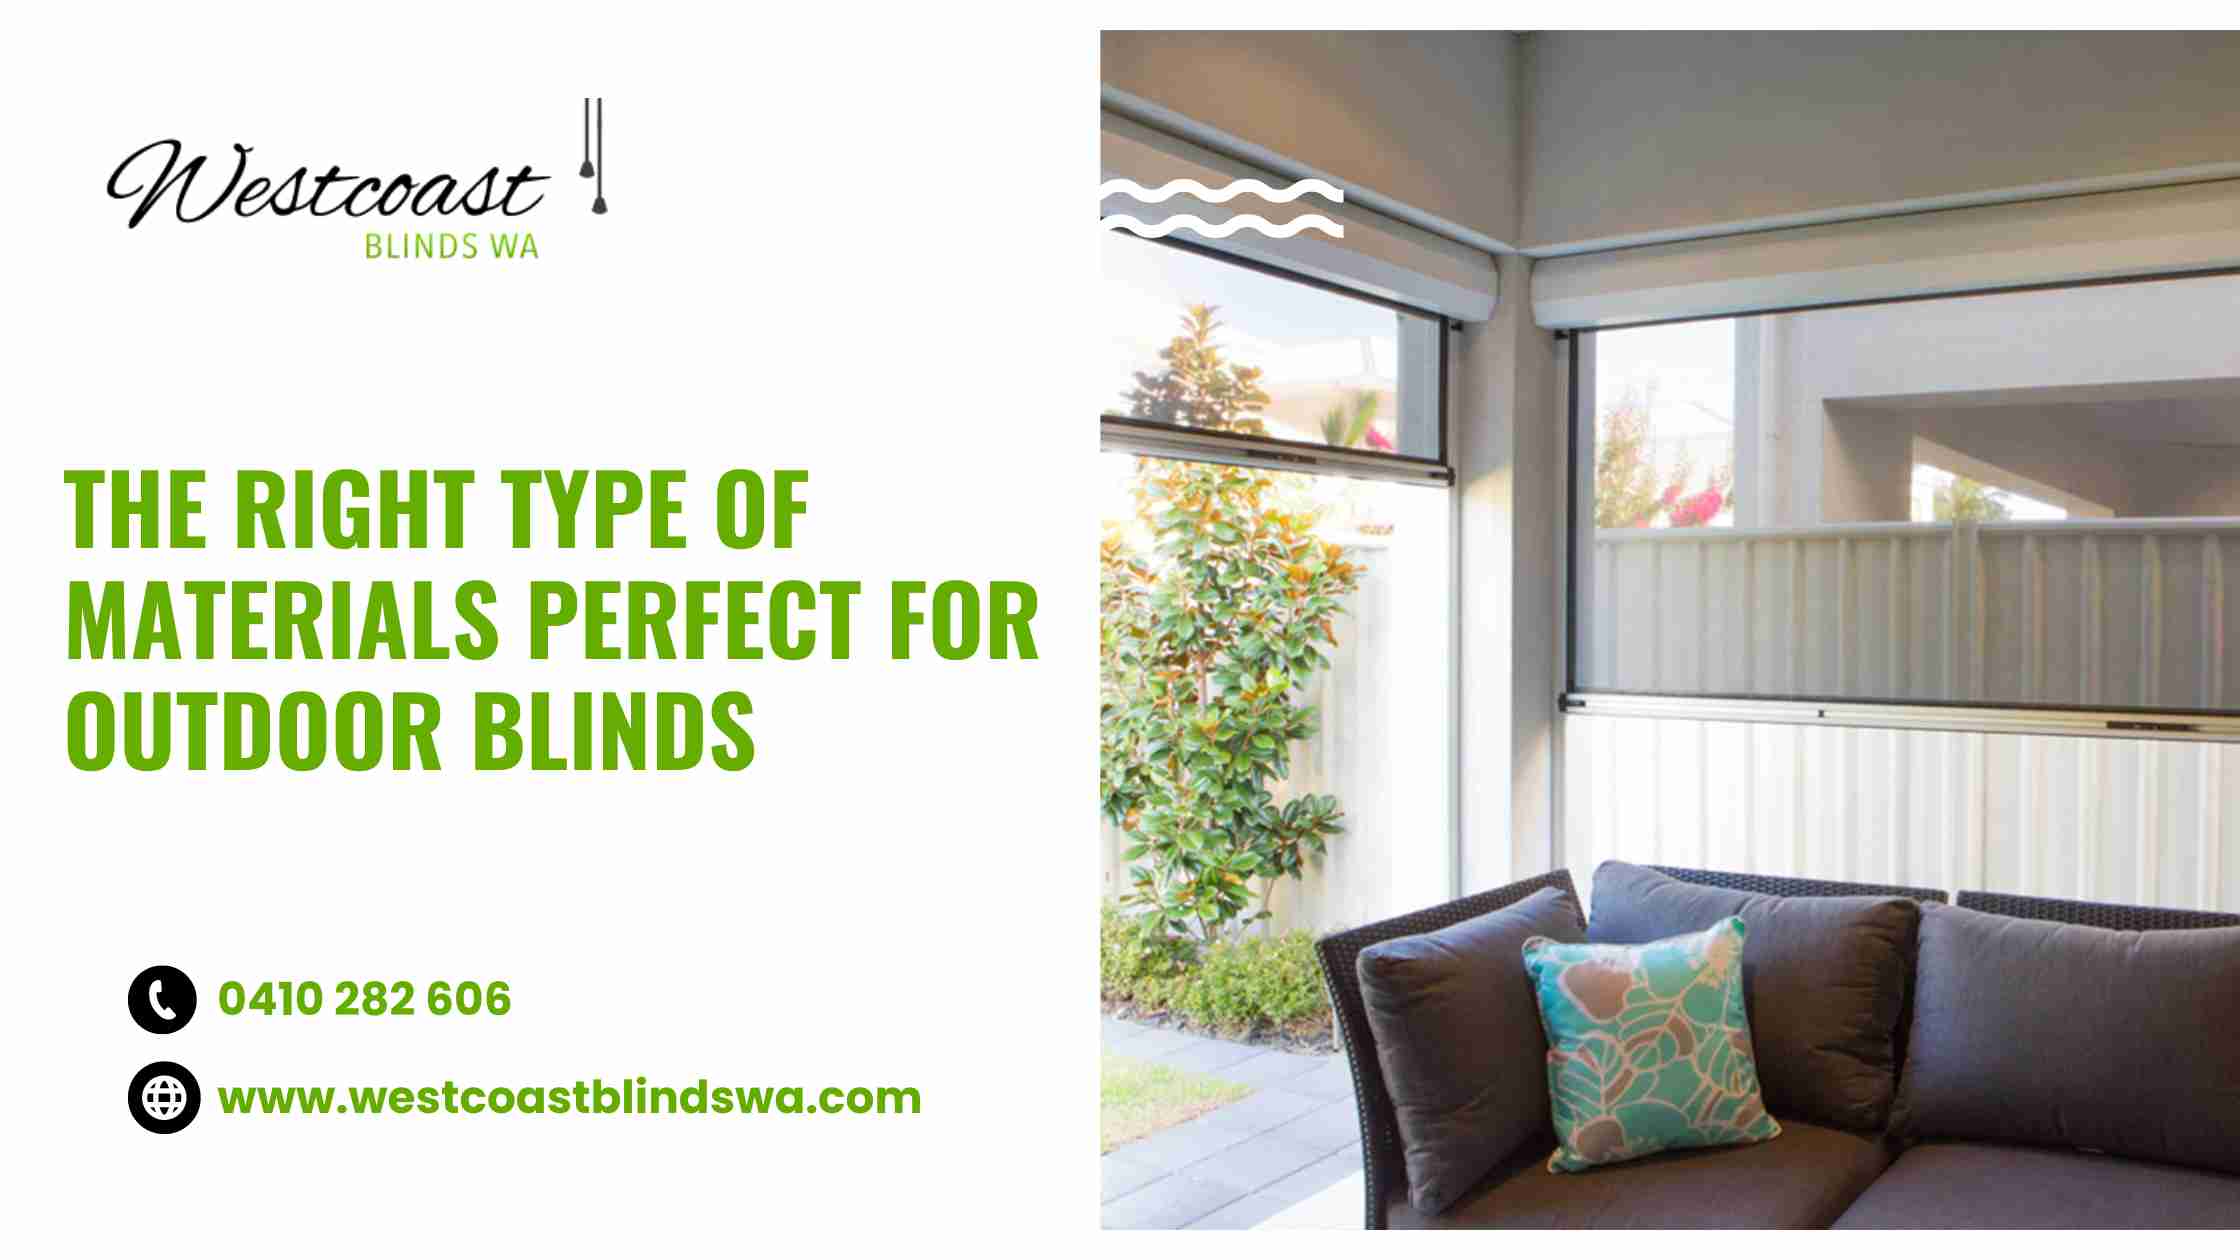 Which Materials Are Best To Use For Outdoor Blinds?